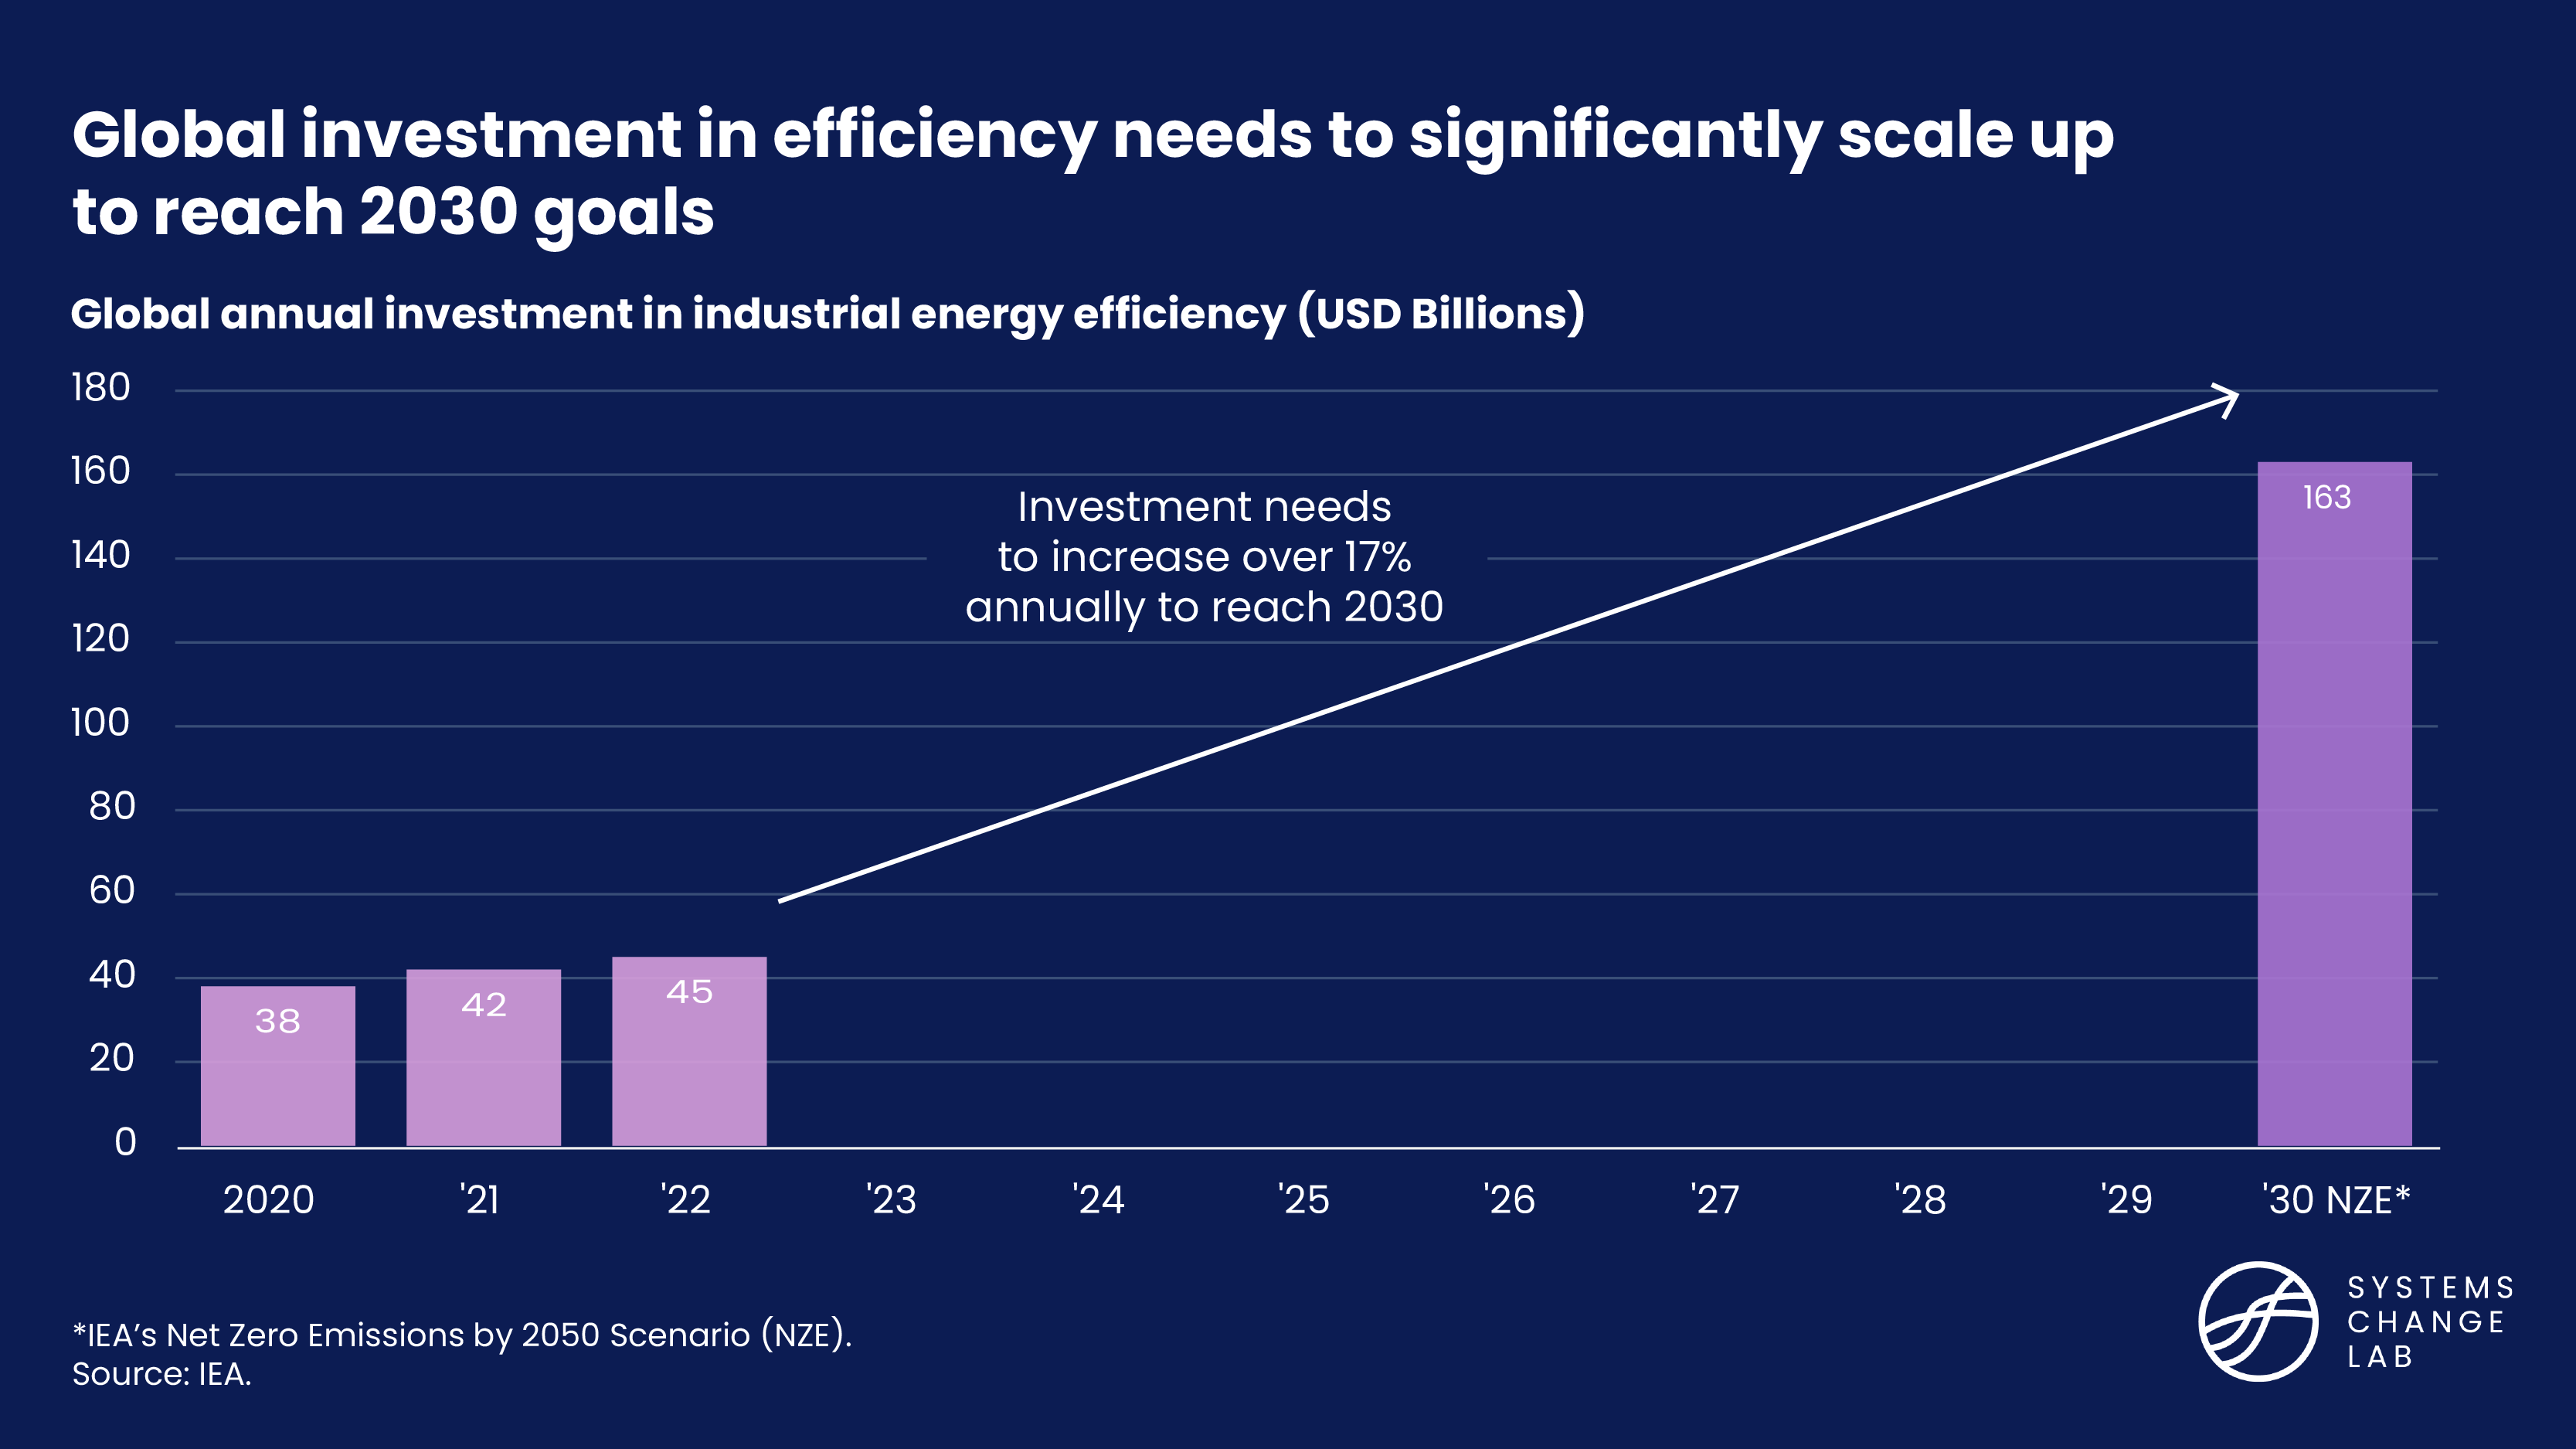 Global investment in efficiency needs to significantly scale up to reach 2030 goals